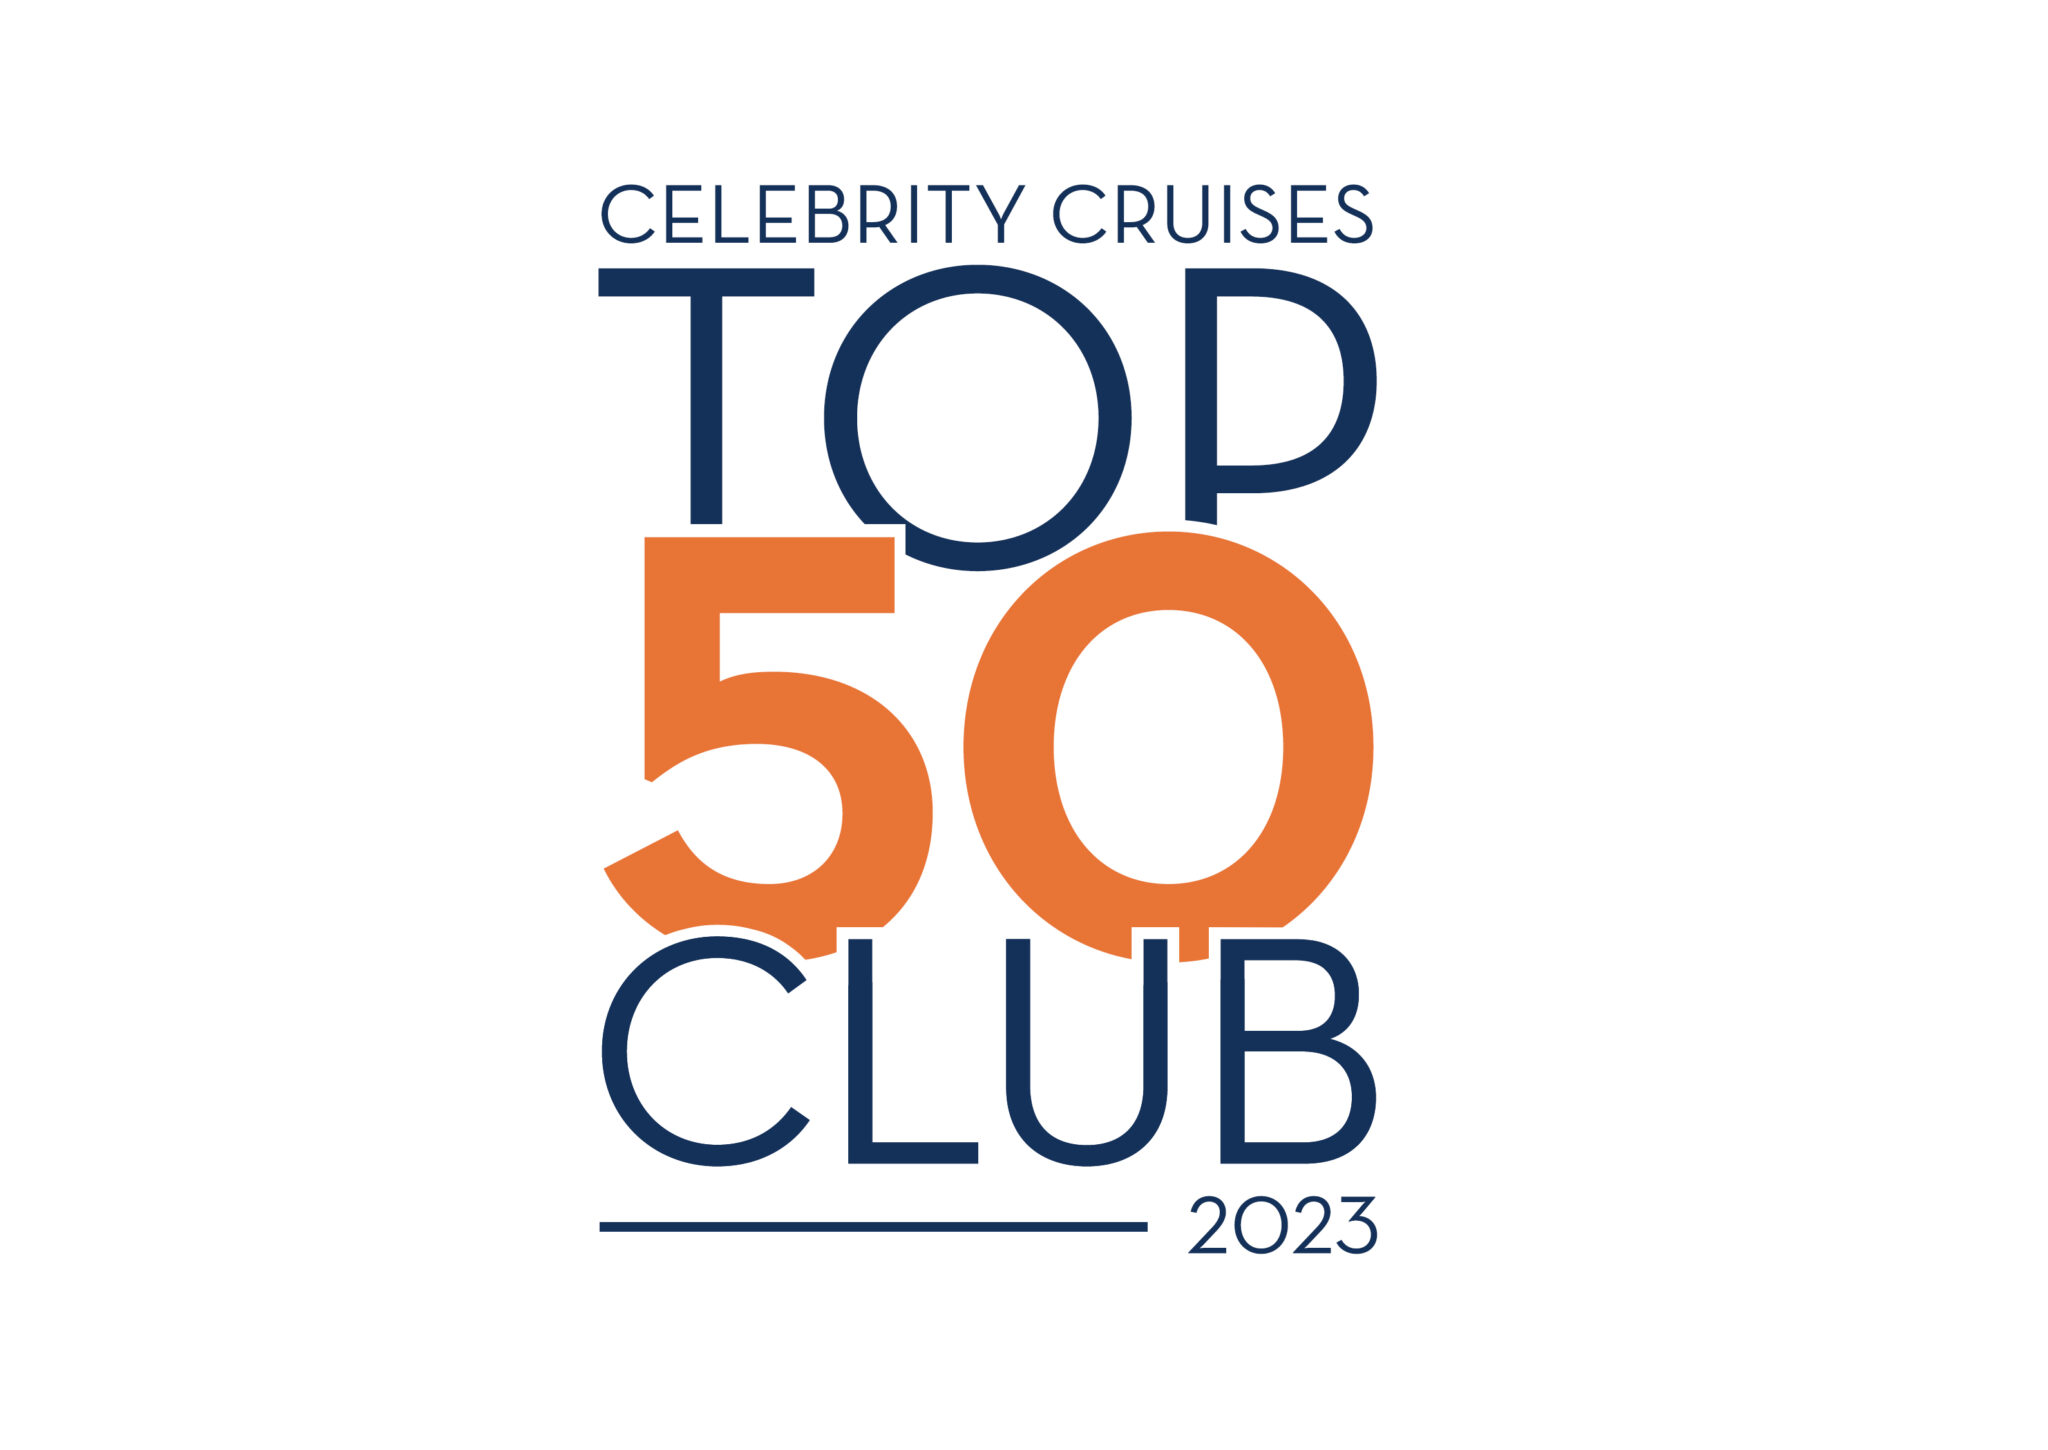 Celebrating Our Top 50 Club Recognition with Celebrity Cruises Luxury